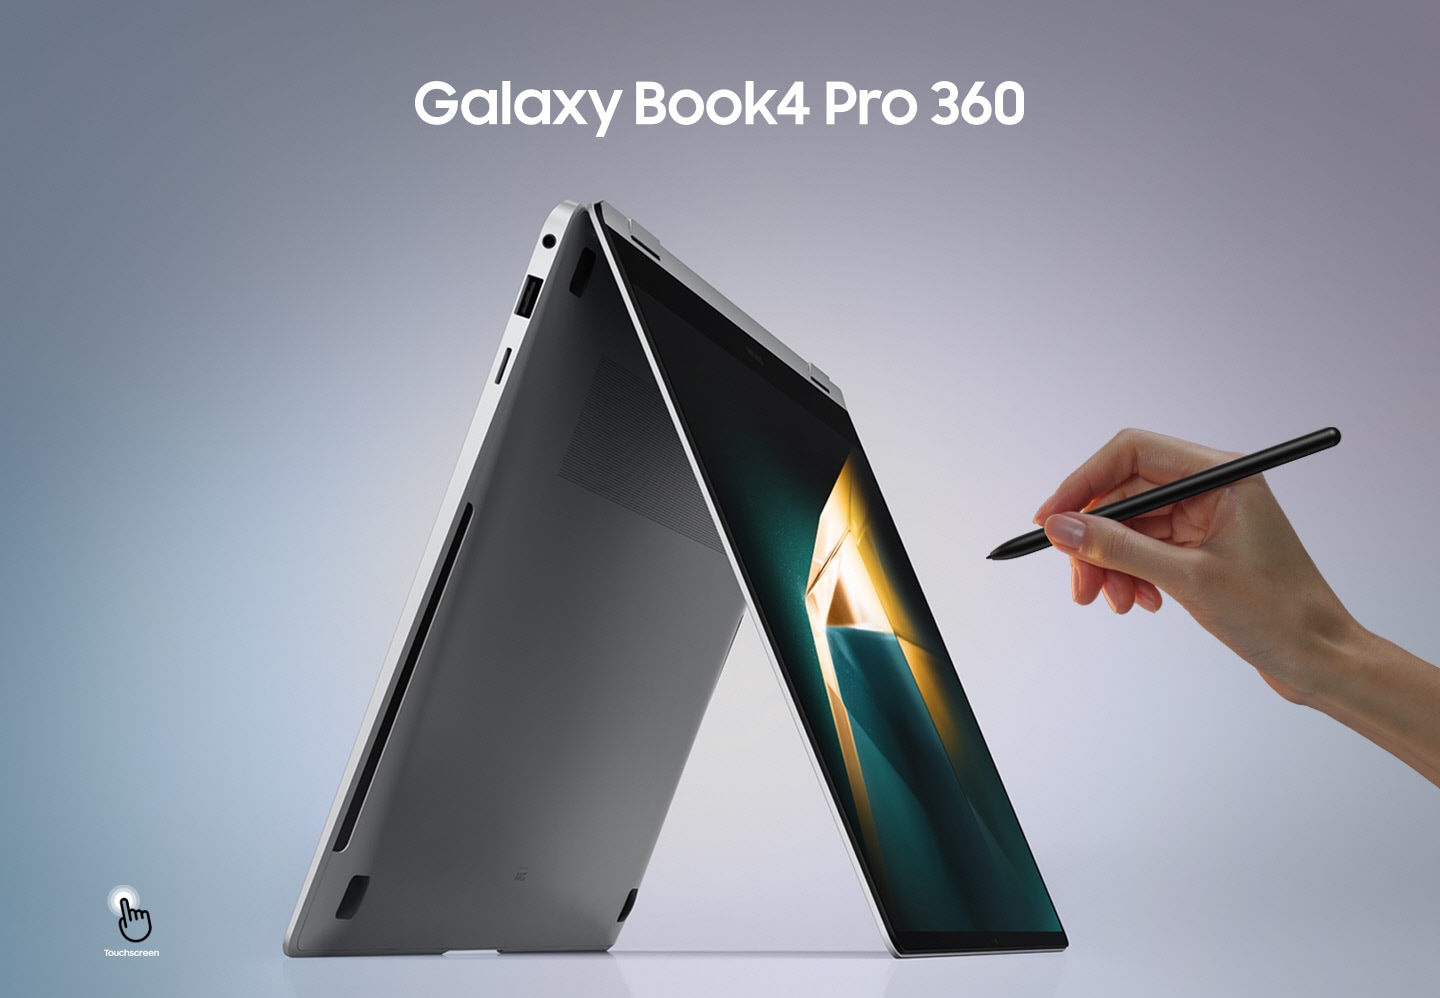 Galaxy Book4 Pro 360 in Platinum Silver is standing folded like a tent, facing right with a dark green and yellow wallpaper onscreen and a person holding S Pen pointed at the screen. Touchscreen icon shown.